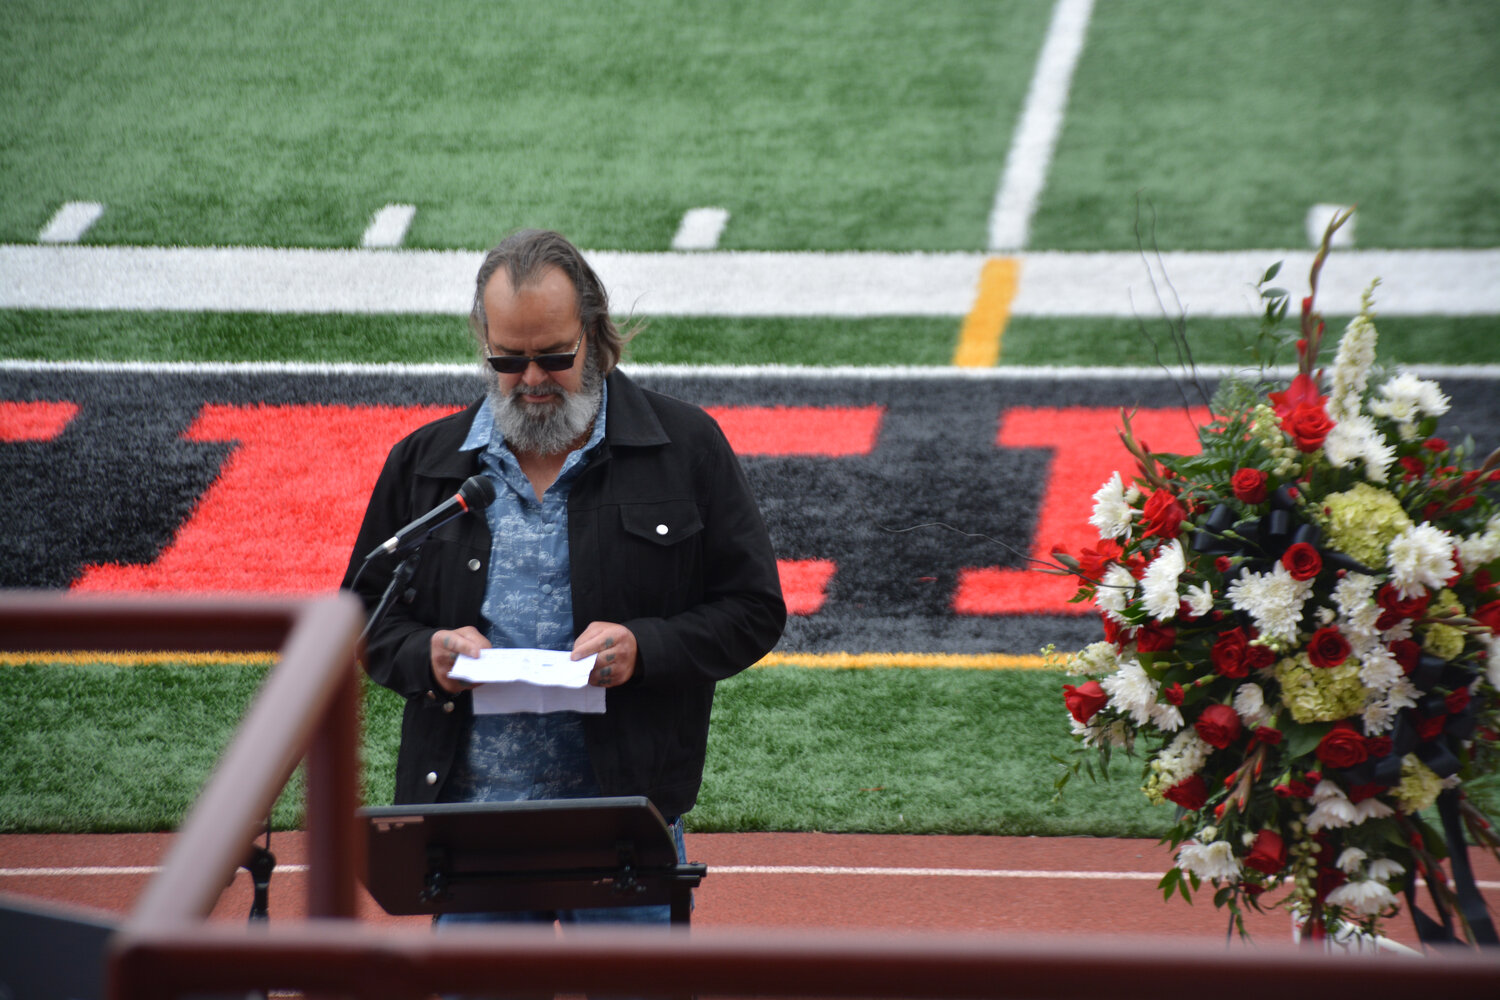 Dwayne McCarver shares his memories of Shawn Jemtegaard at  a memorial at Yelm High School on May 21.